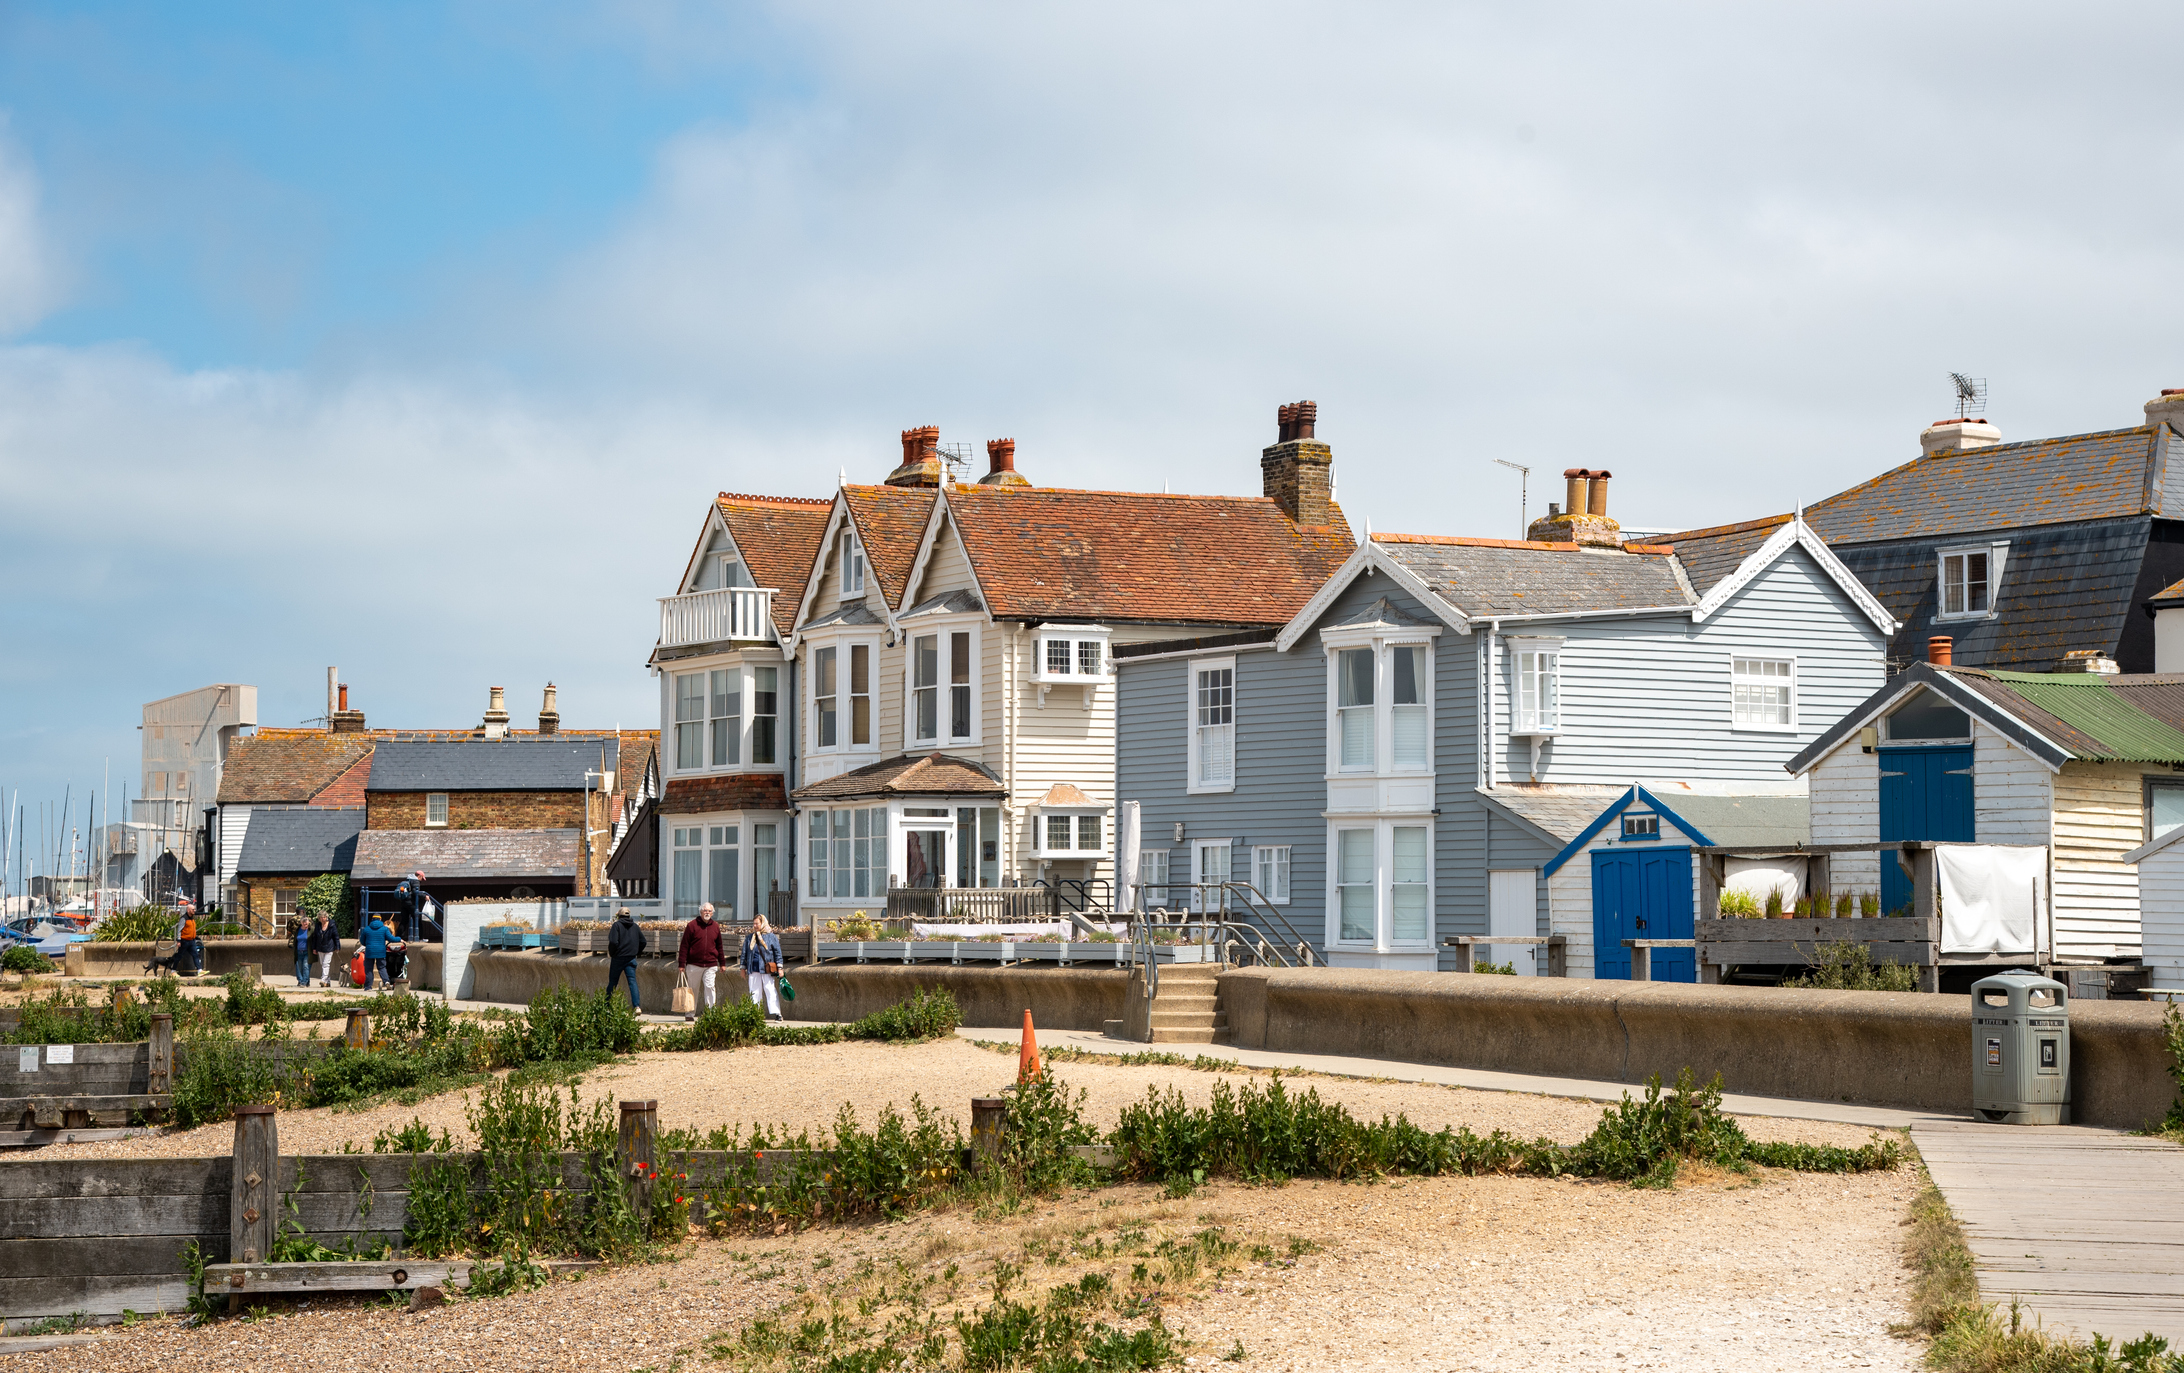 Houses in Whitstable